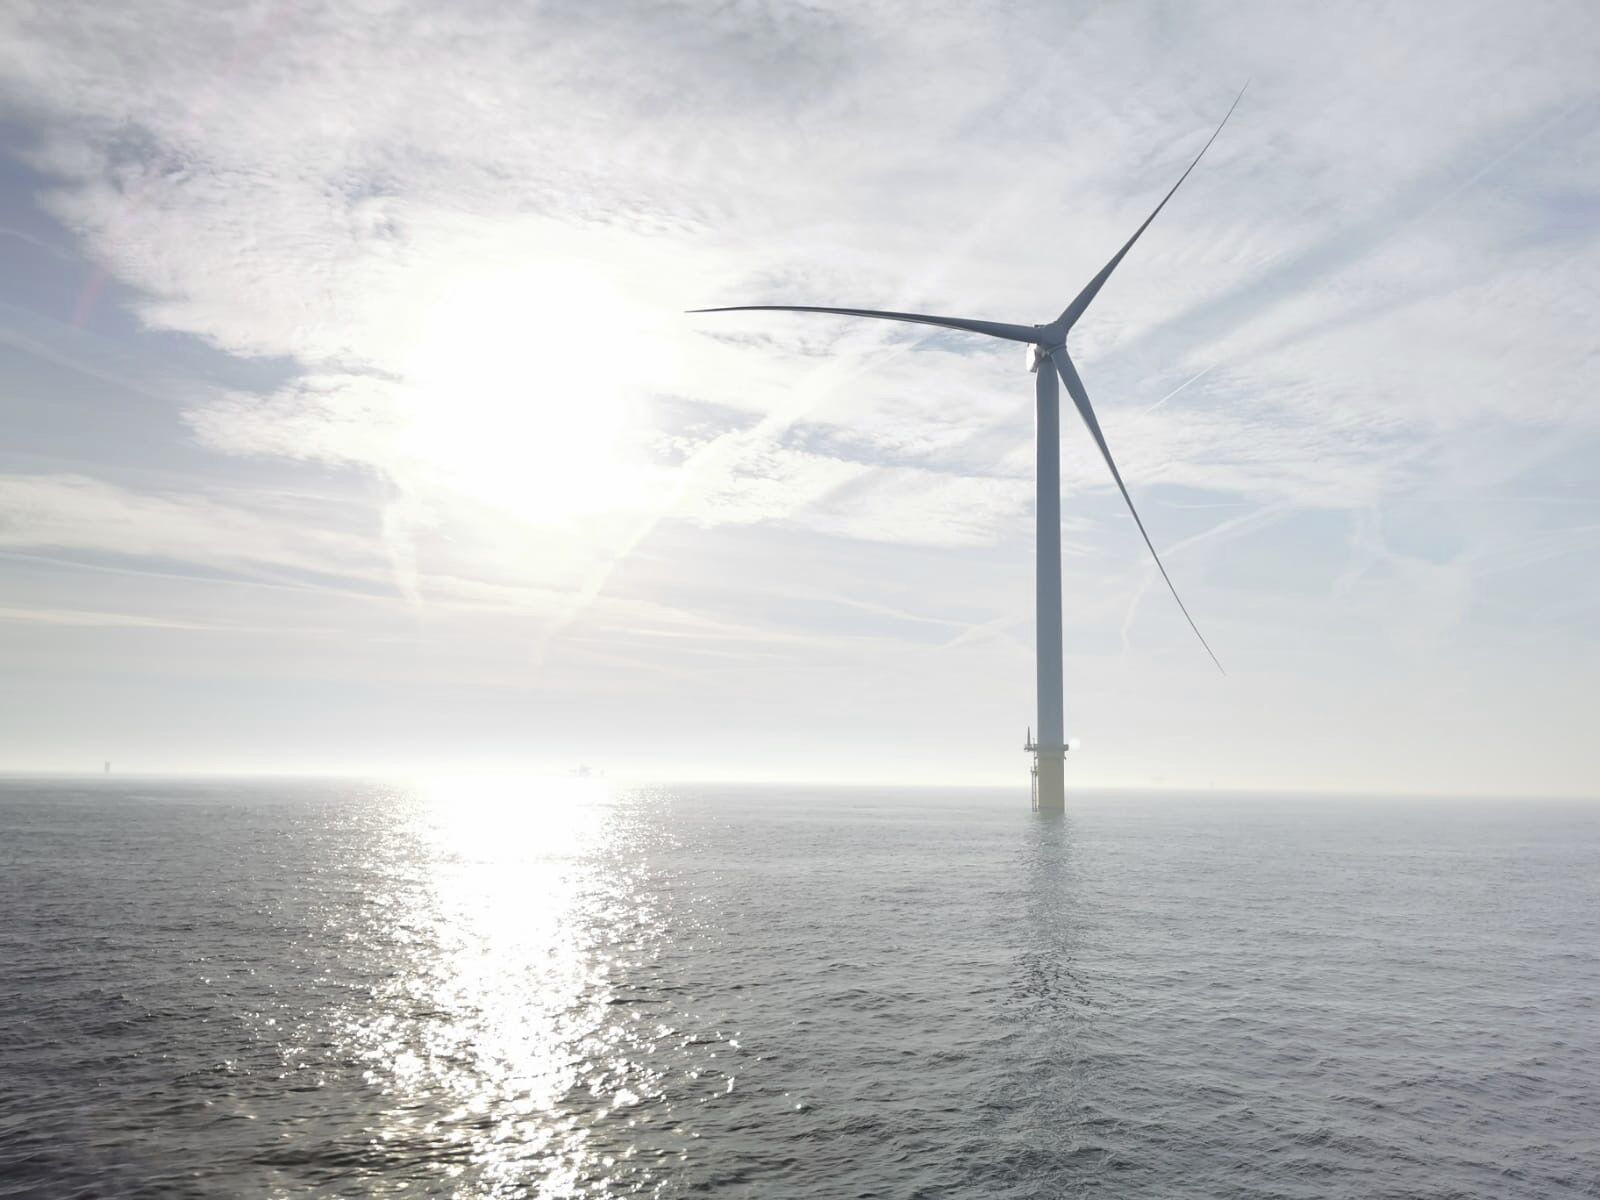 First wind turbine at Hollandse Kust Zuid offshore wind farm in the Netherlands